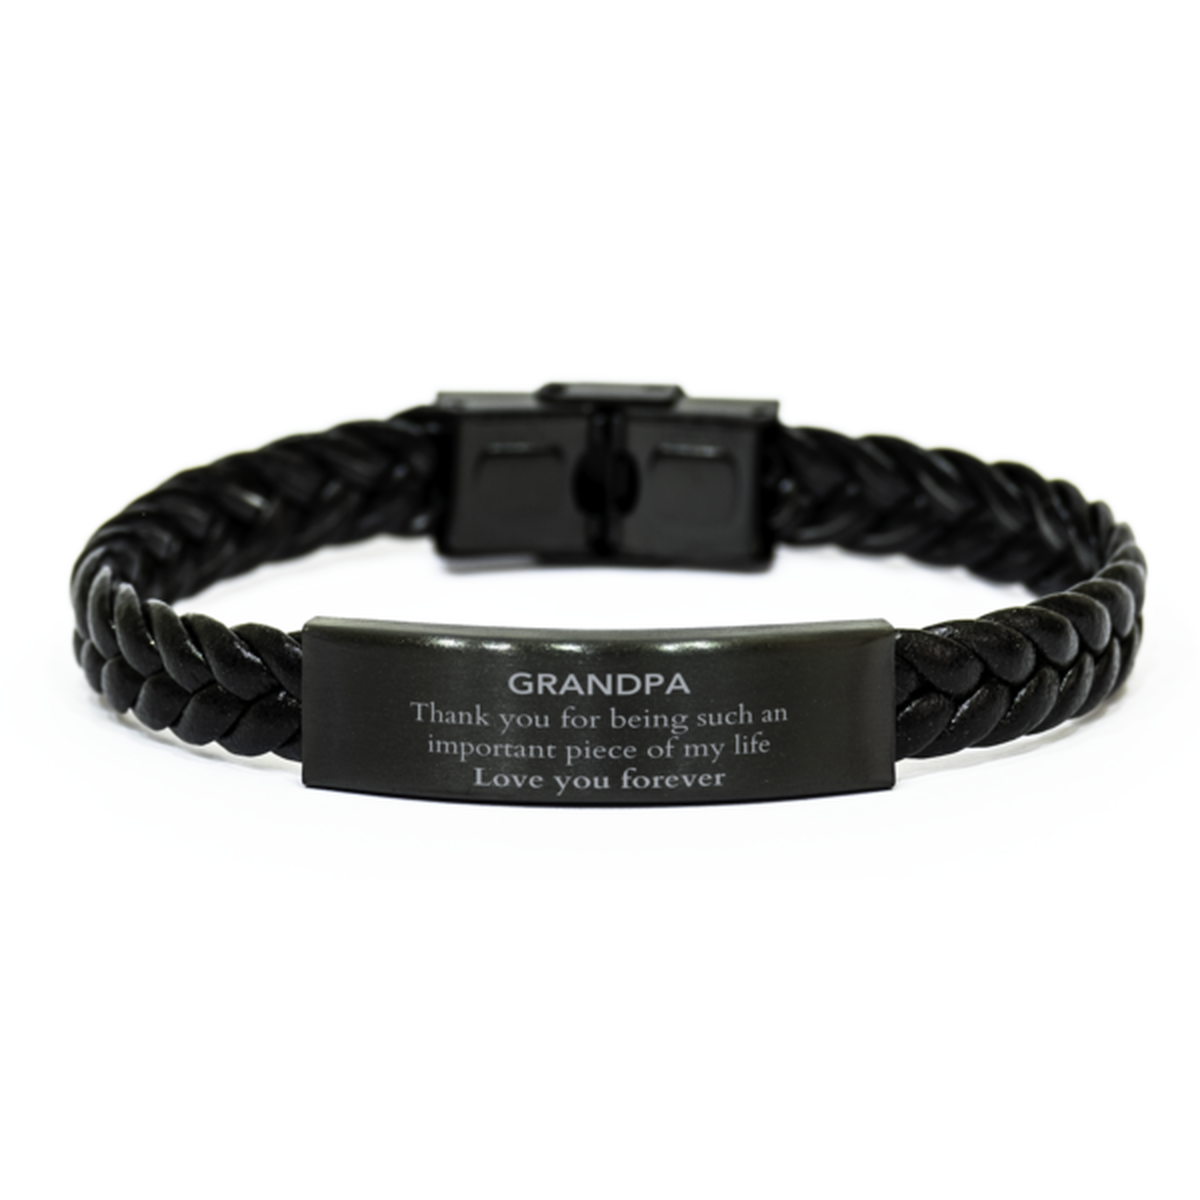 Appropriate Grandpa Braided Leather Bracelet Epic Birthday Gifts for Grandpa Thank you for being such an important piece of my life Grandpa Christmas Mothers Fathers Day